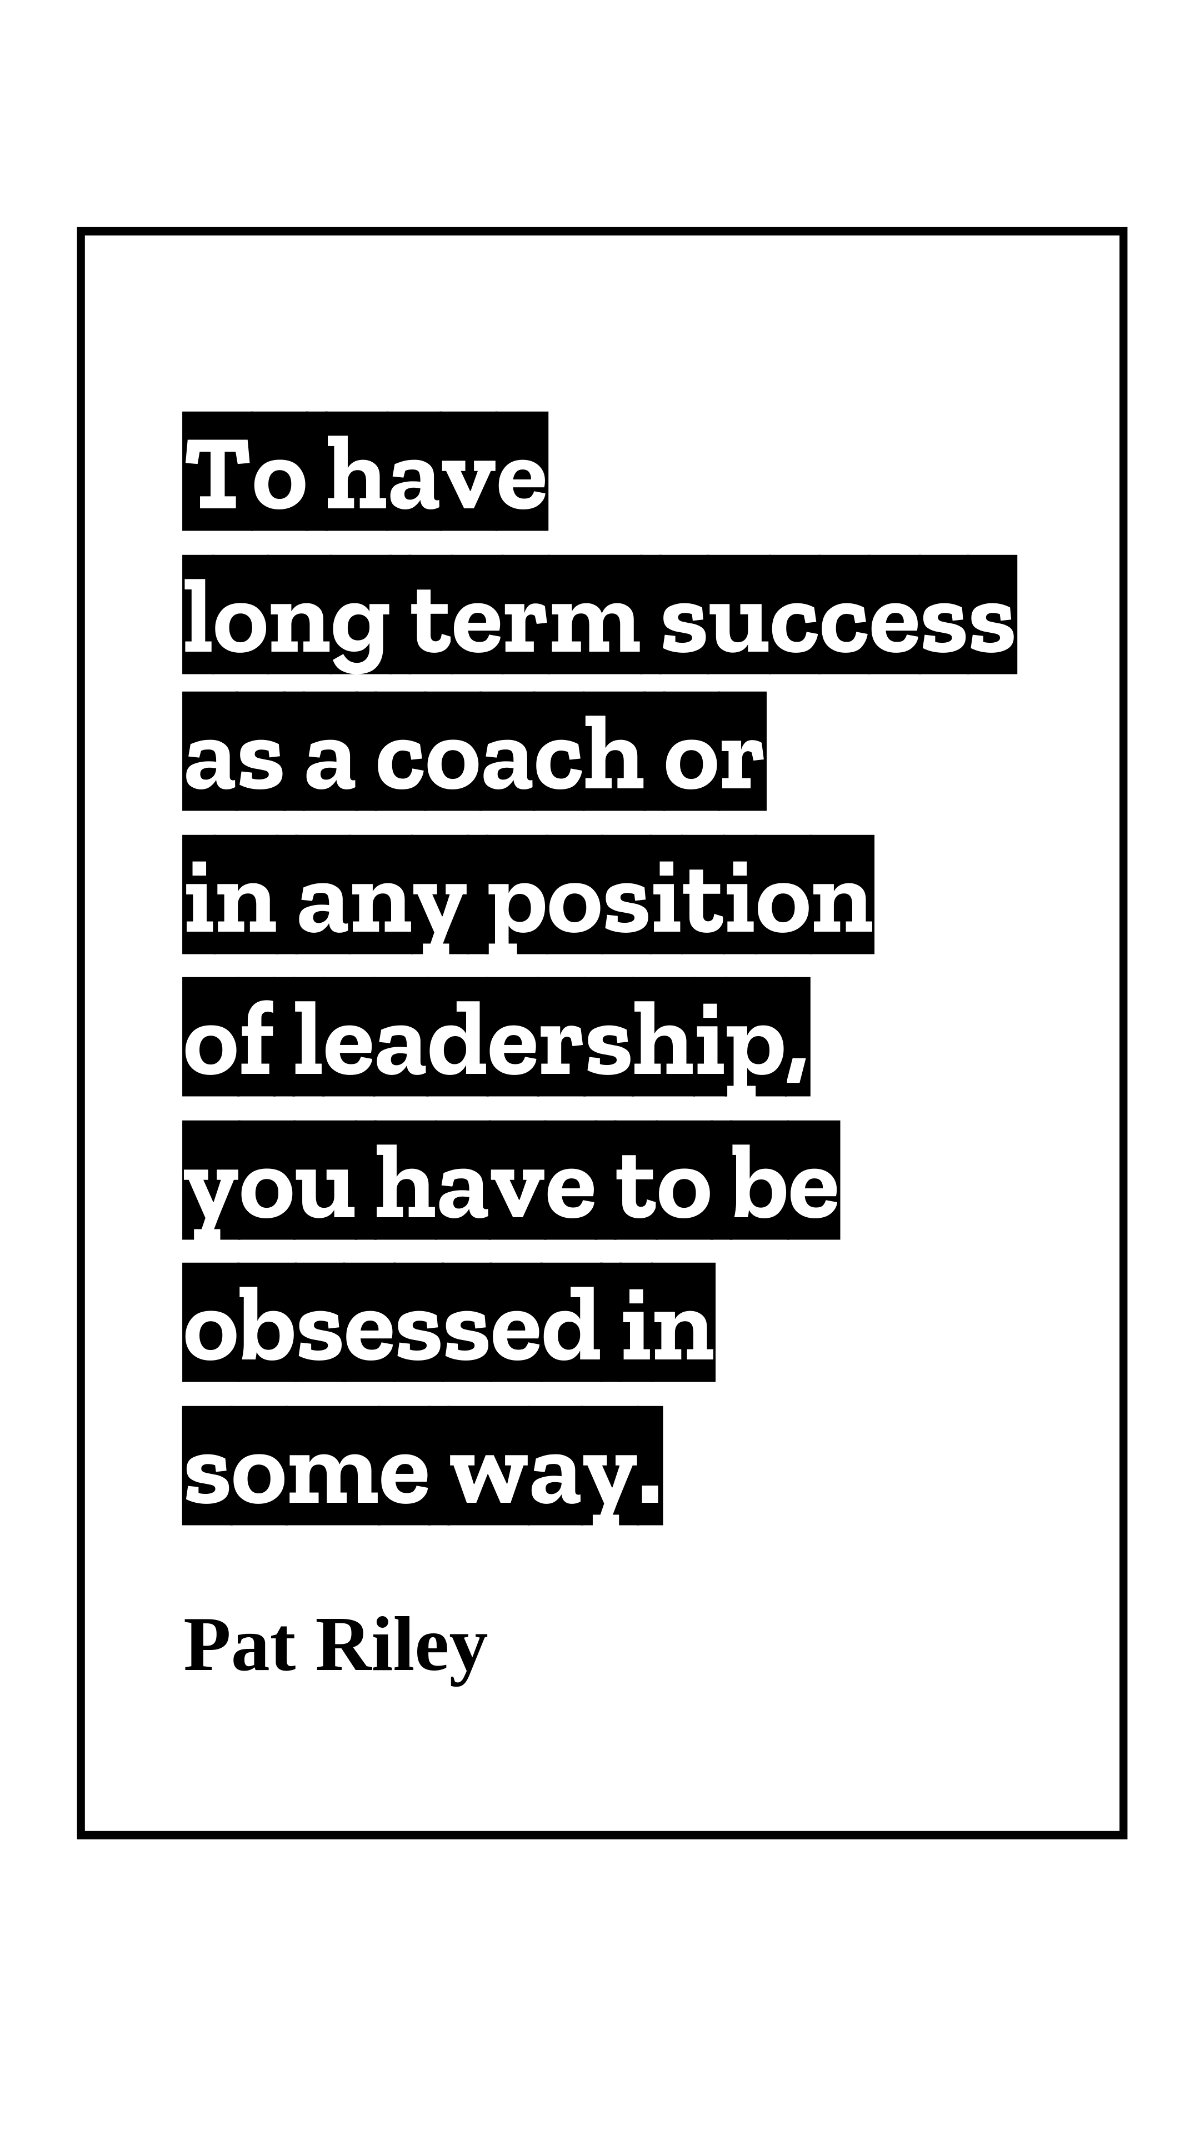 Pat Riley - To have long term success as a coach or in any position of leadership, you have to be obsessed in some way. Template